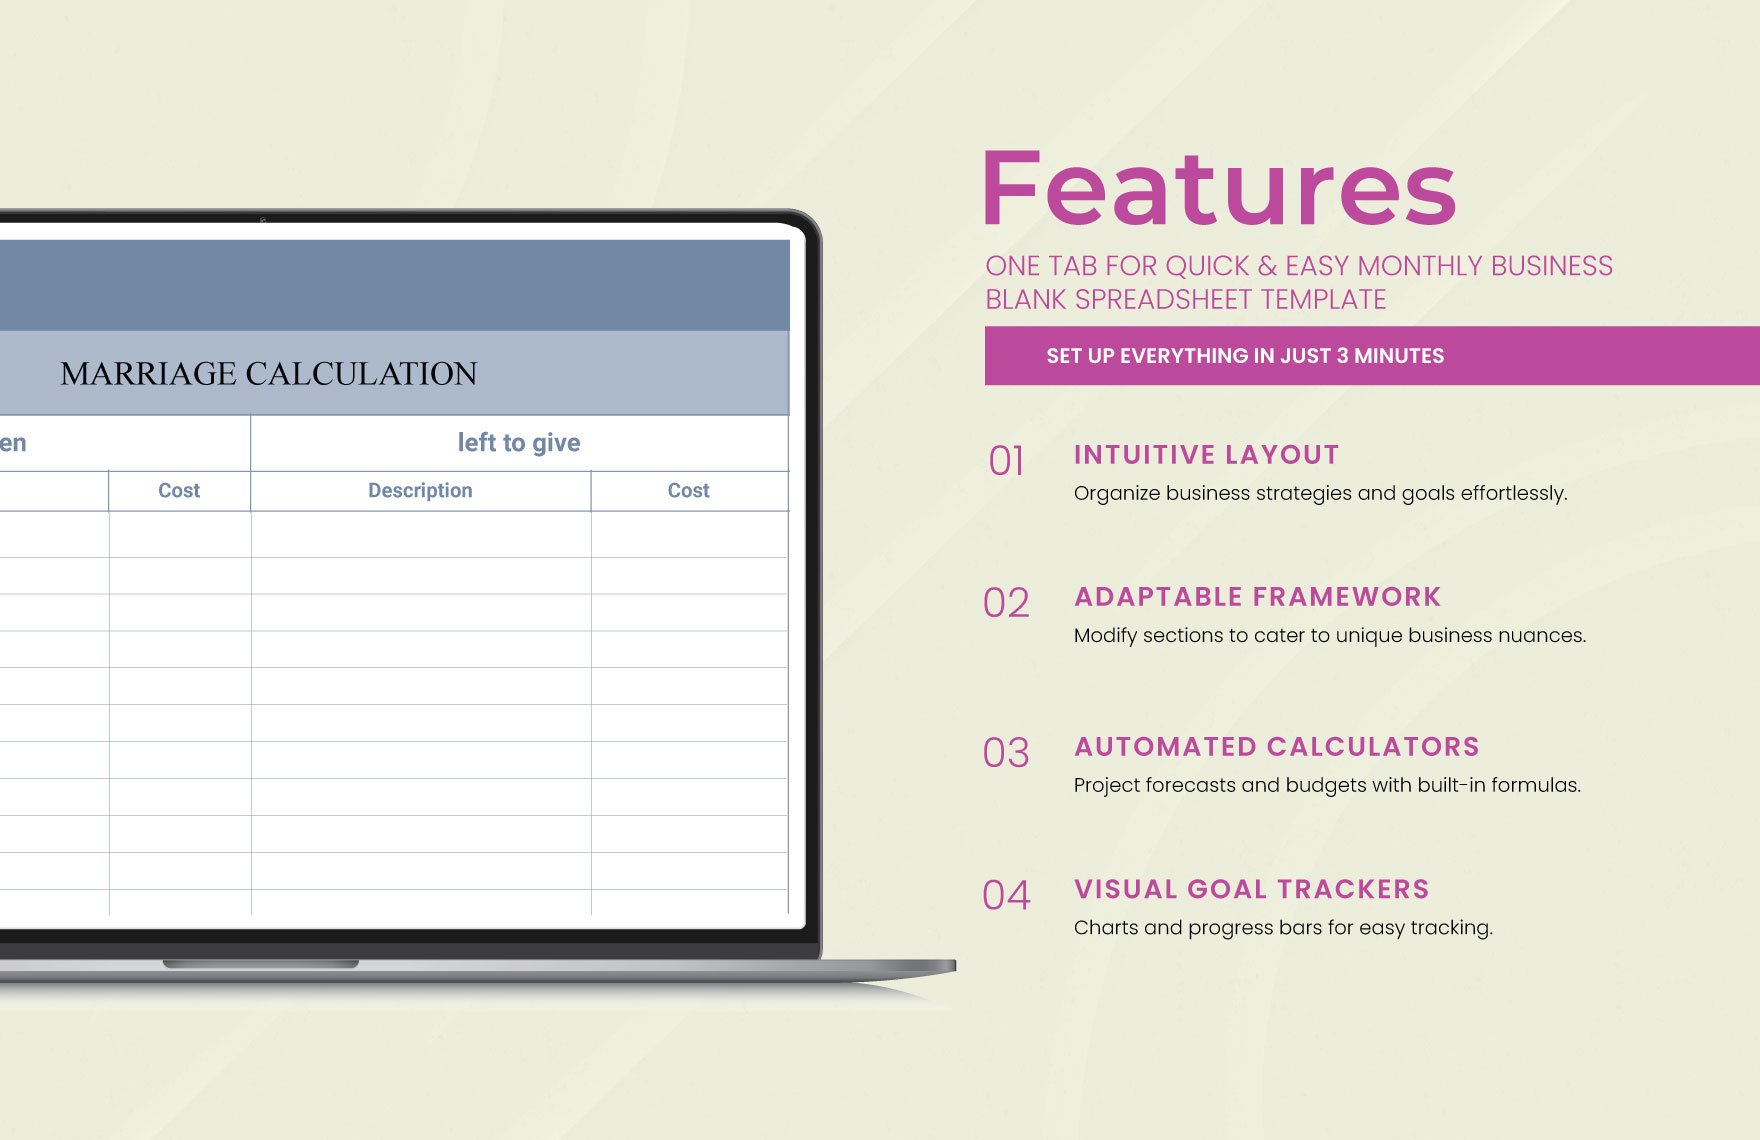 Monthly Business Blank Spreadsheet Template